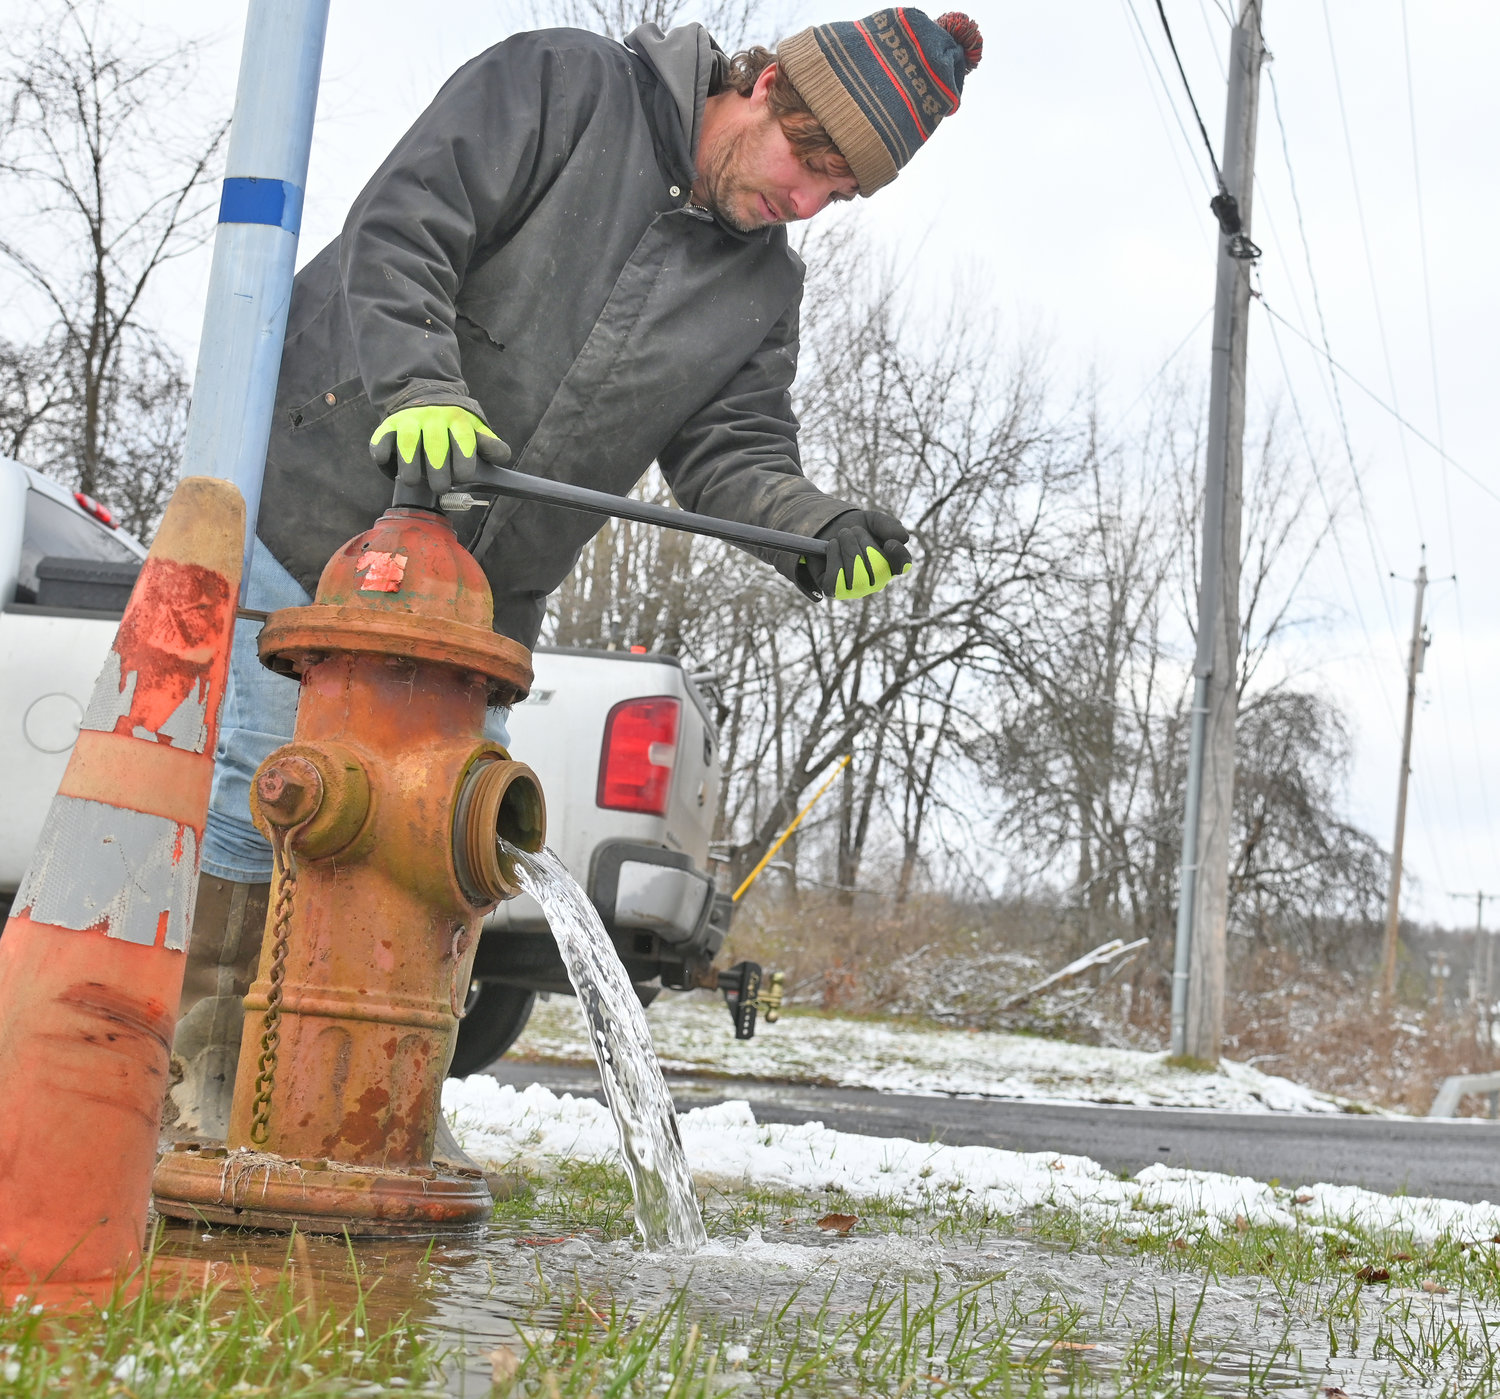 FIXING THE FLOW — Billy Knudsen of the Town of Lee Water Department turns on a hydrant along Turin Road after a six-inch pipe was fixed just north of this hydrant Monday. Knudsen said a line of hydrants needed to be slowly turned on to bleed air from the water lines. Stokes Elementary School was closed today and residences in the town south of the Route 26, Stokes-Lee Center Road were without water because of the break. Bottled water was delivered to the school for Tuesday classes. Officials said Monday night that the earliest the boil water order would be lifted is Wednesday morning, following testing by the Mohawk Valley Water Authority. Residents can check the Town of Lee website for updated information regarding the boil water status.